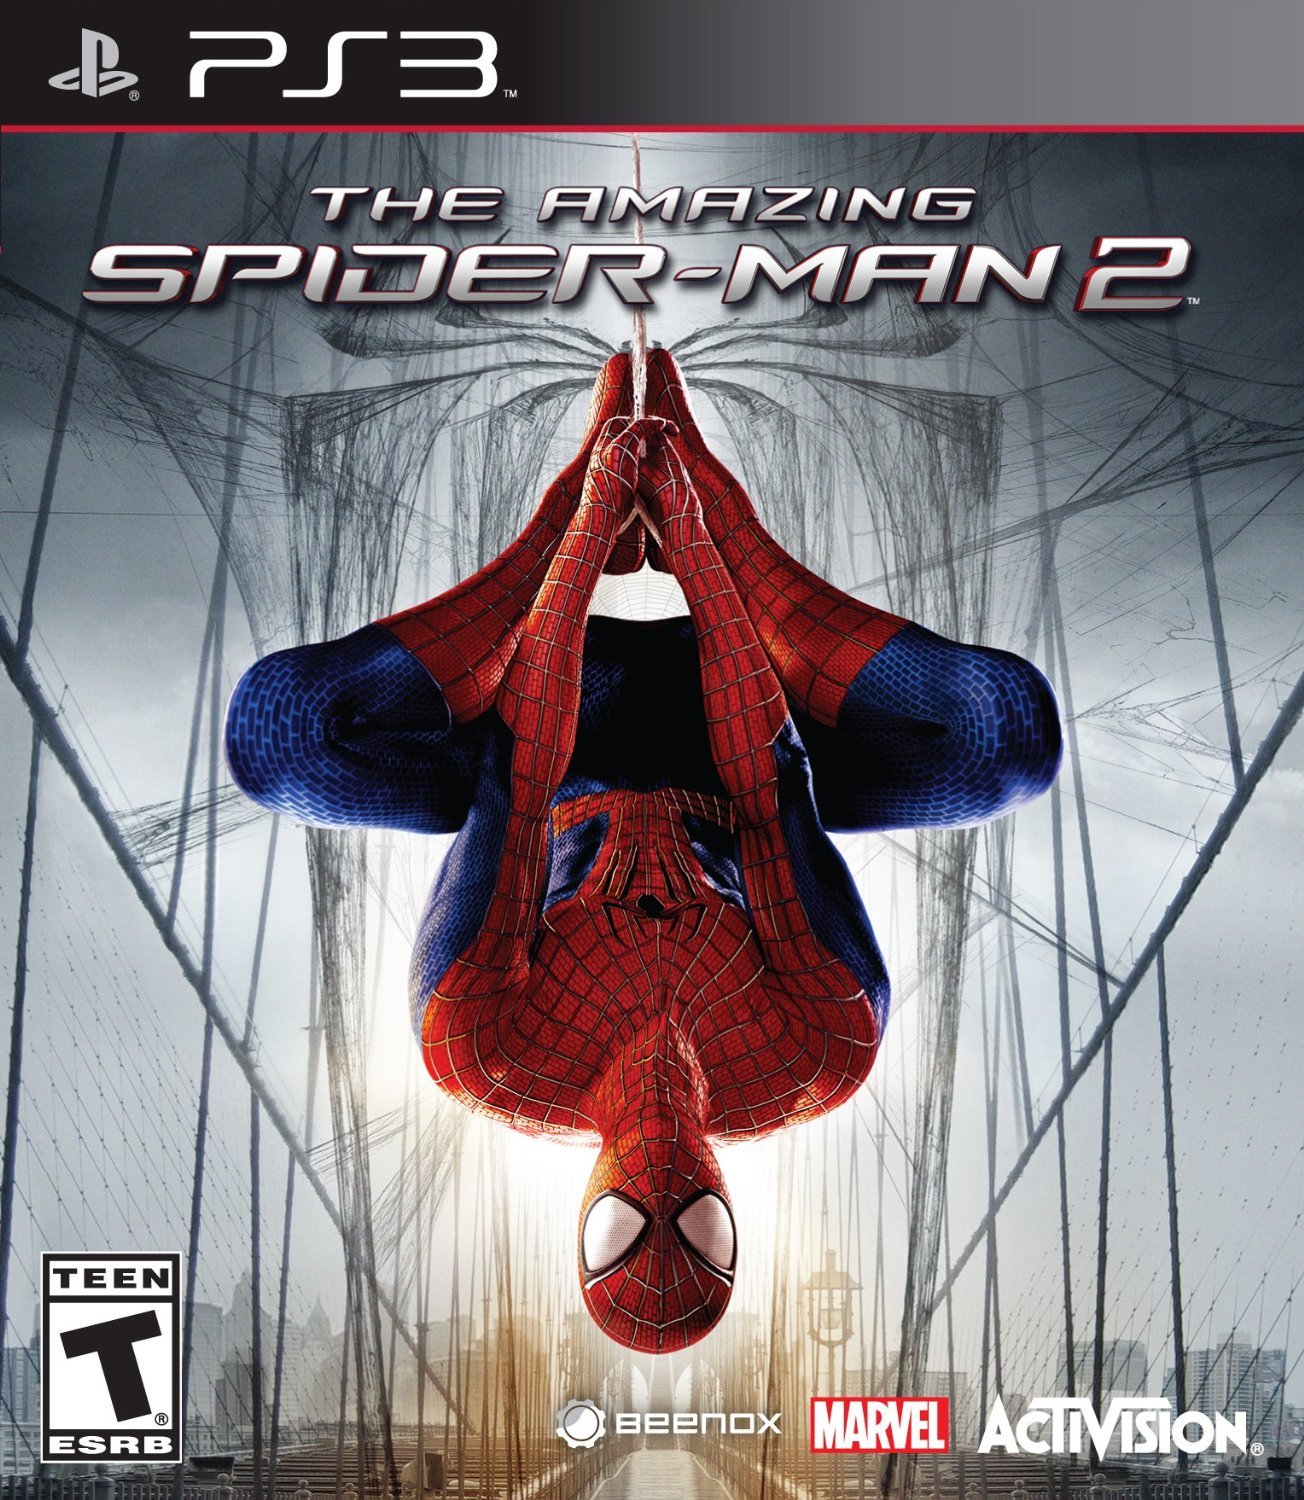 The Amazing Spiderman 2 (PS3) - image 1 of 10